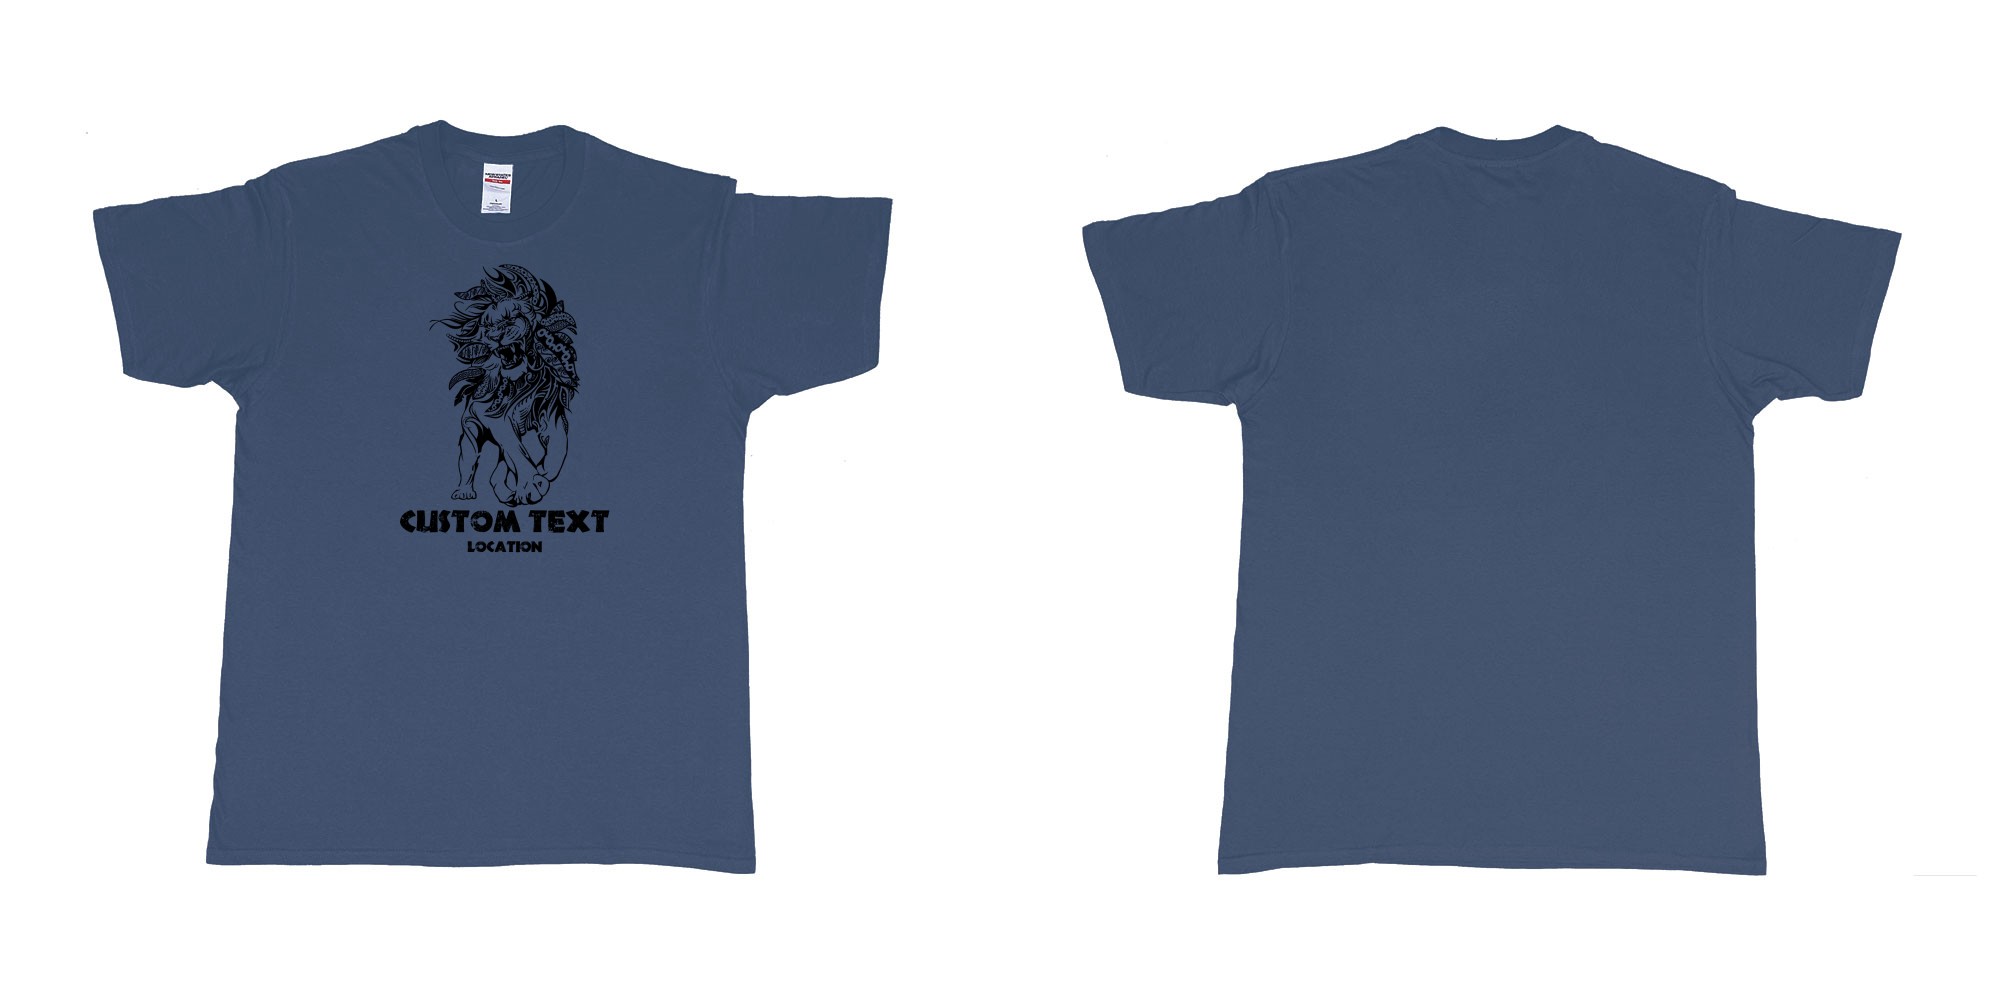 Custom tshirt design lion august tribal in fabric color navy choice your own text made in Bali by The Pirate Way